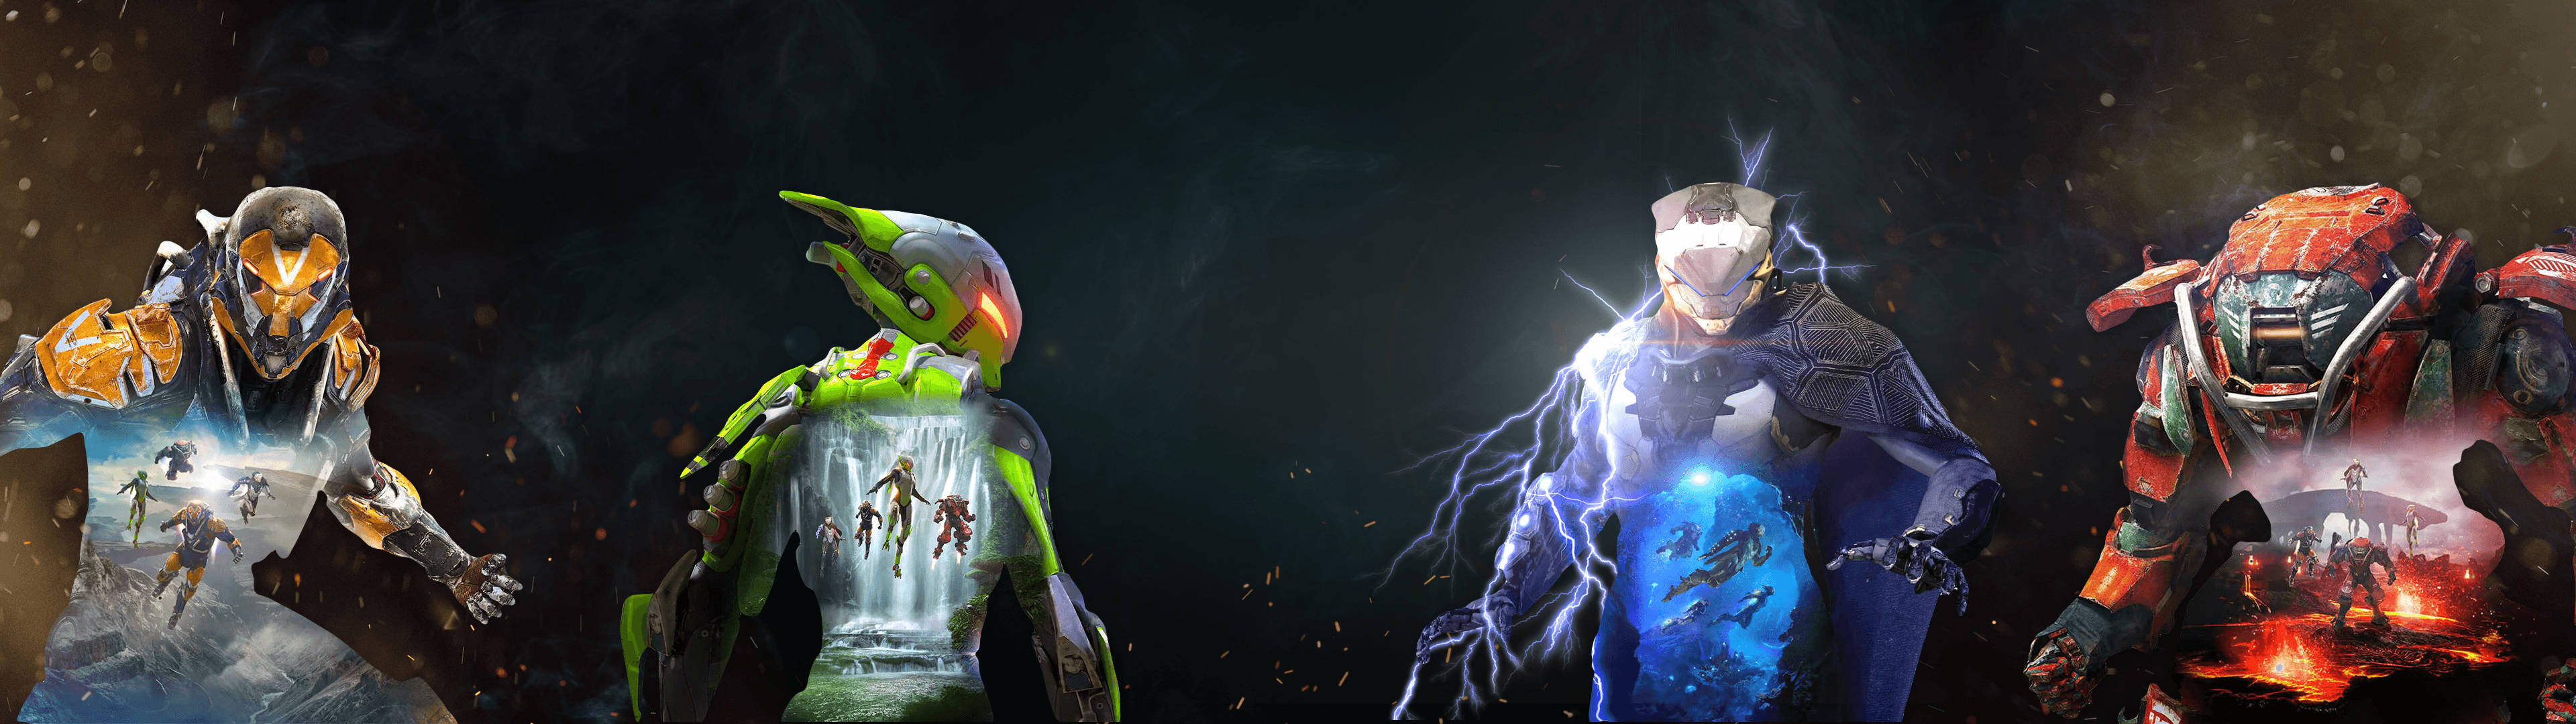 3840X1080 Anthem Wallpaper and Background